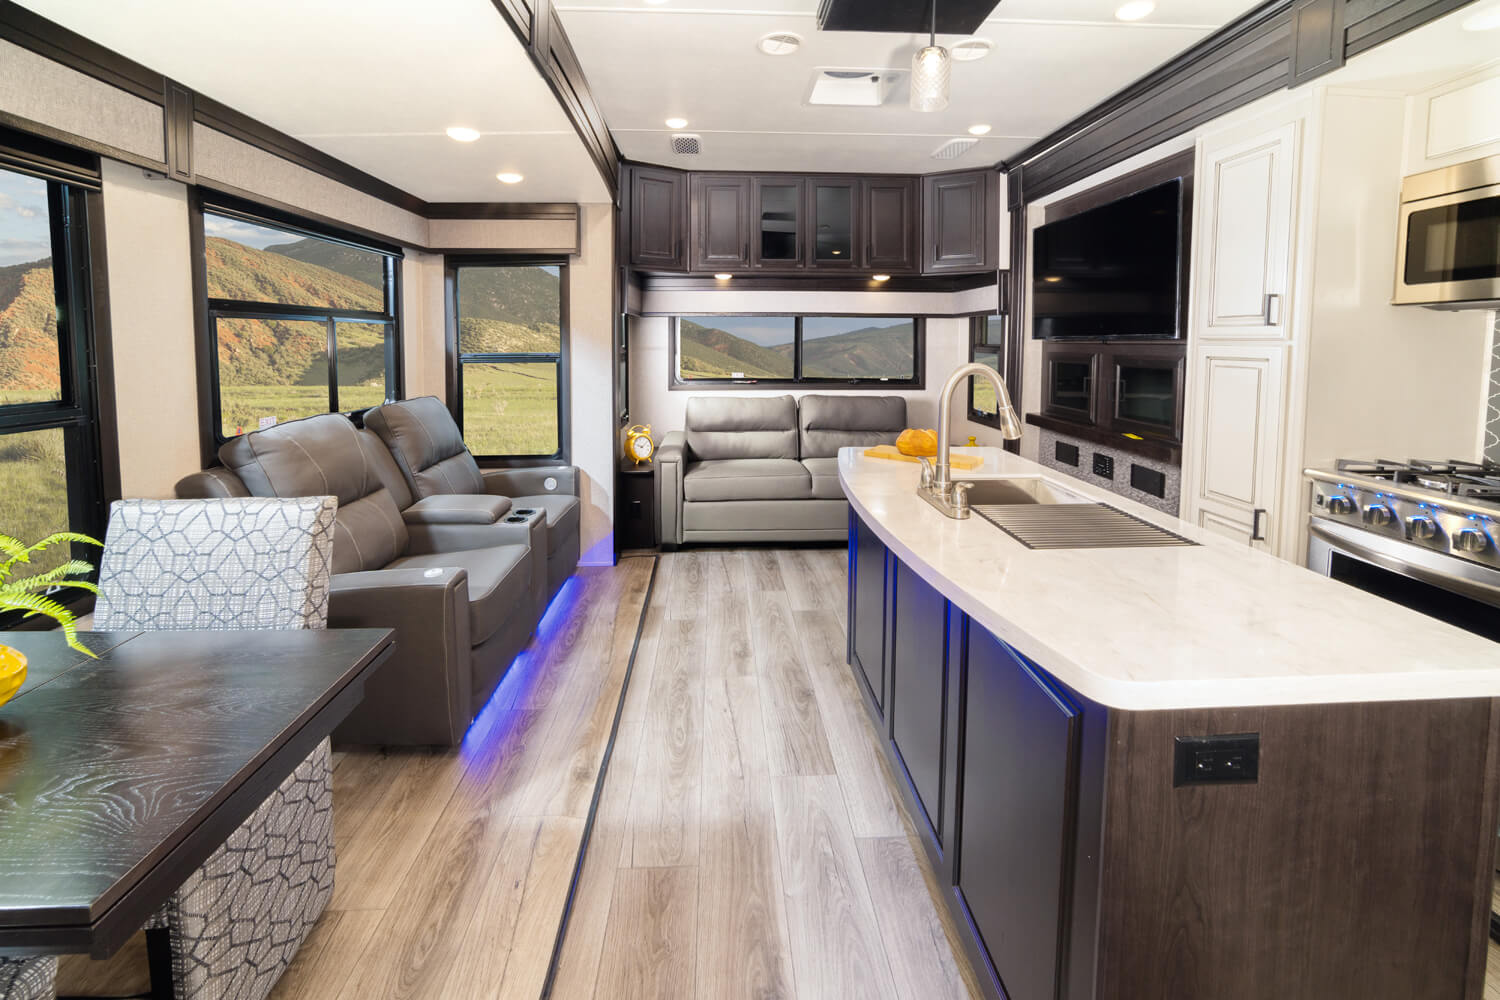 5th Wheel With Living Room In Back